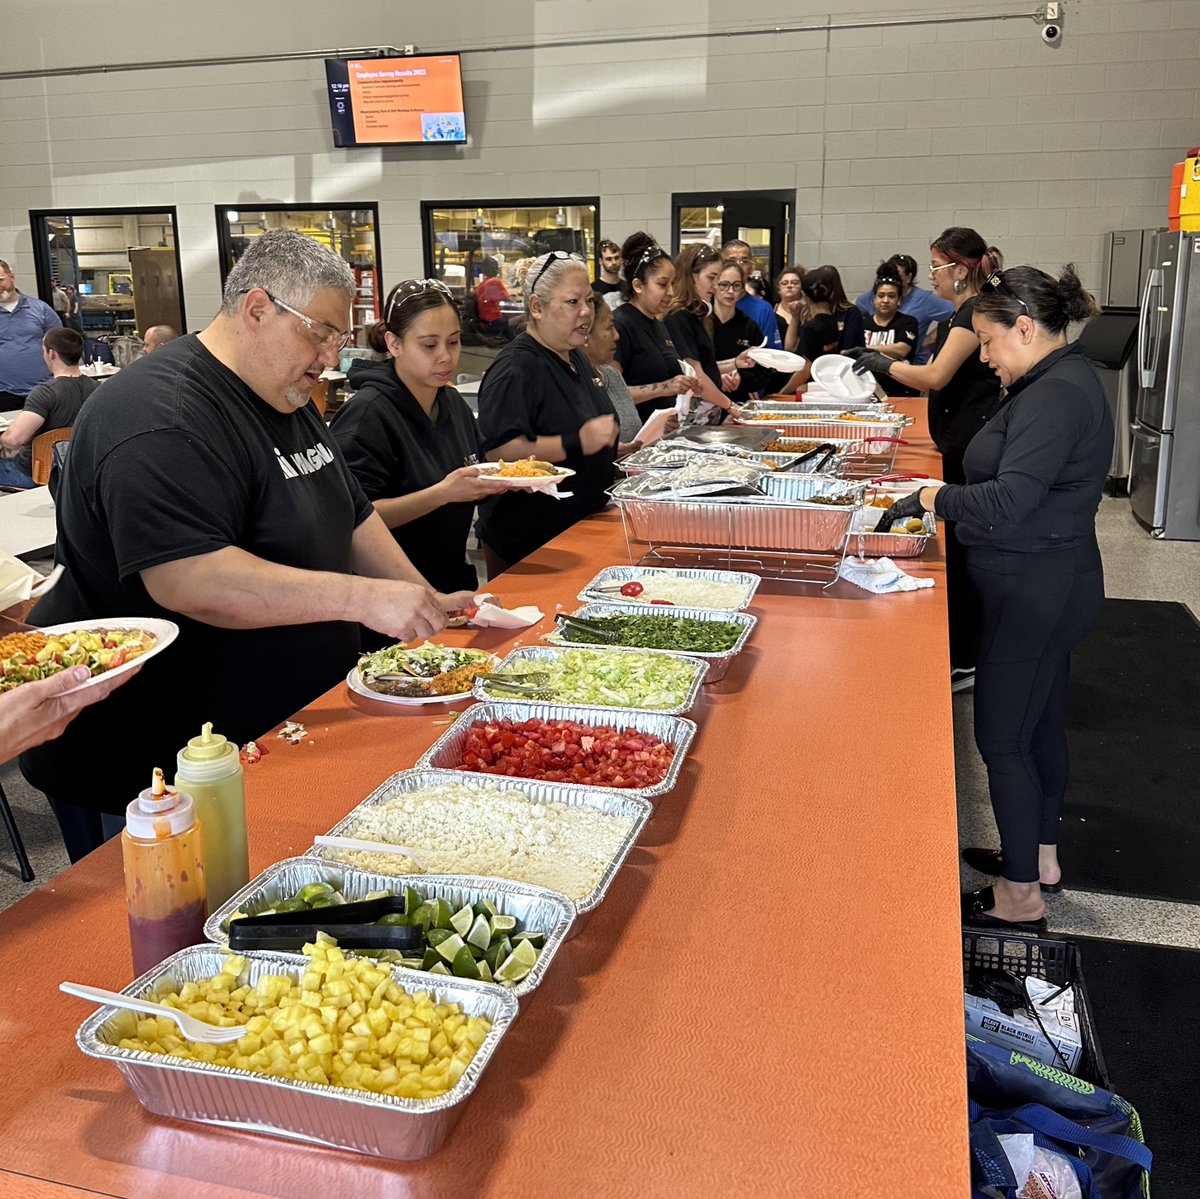 We hope you had such a great Cinco De Mayo! Our team celebrated last week with lunch and a Mariachi singer!

#cincodemayo #manufacturing #companyculture #michigan #westmichigan #oemsupplier